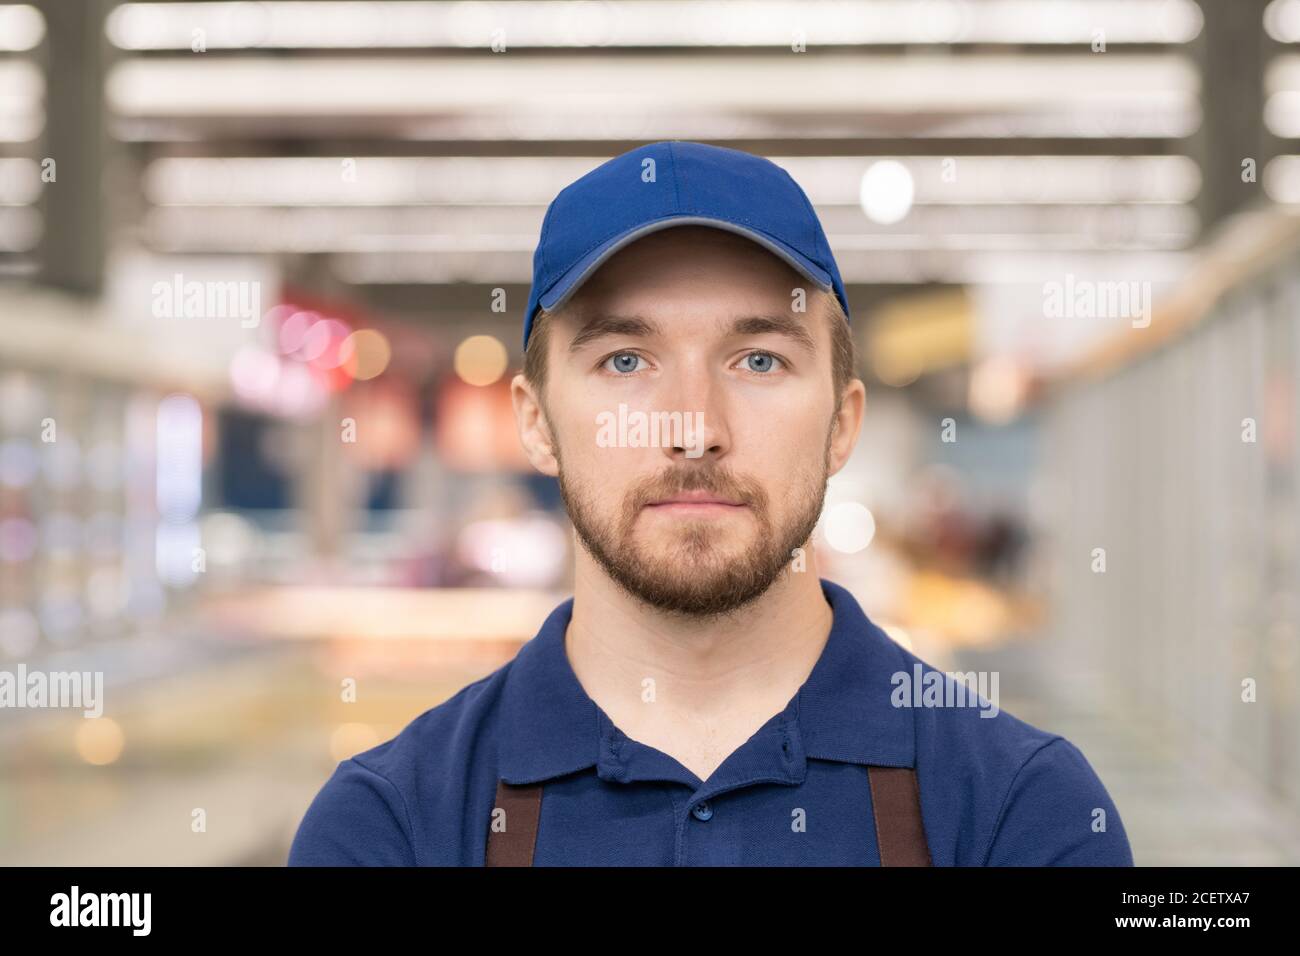 Head and shoulders portrait of handsome young man working in supermarket standing in aisle looking at camera Stock Photo